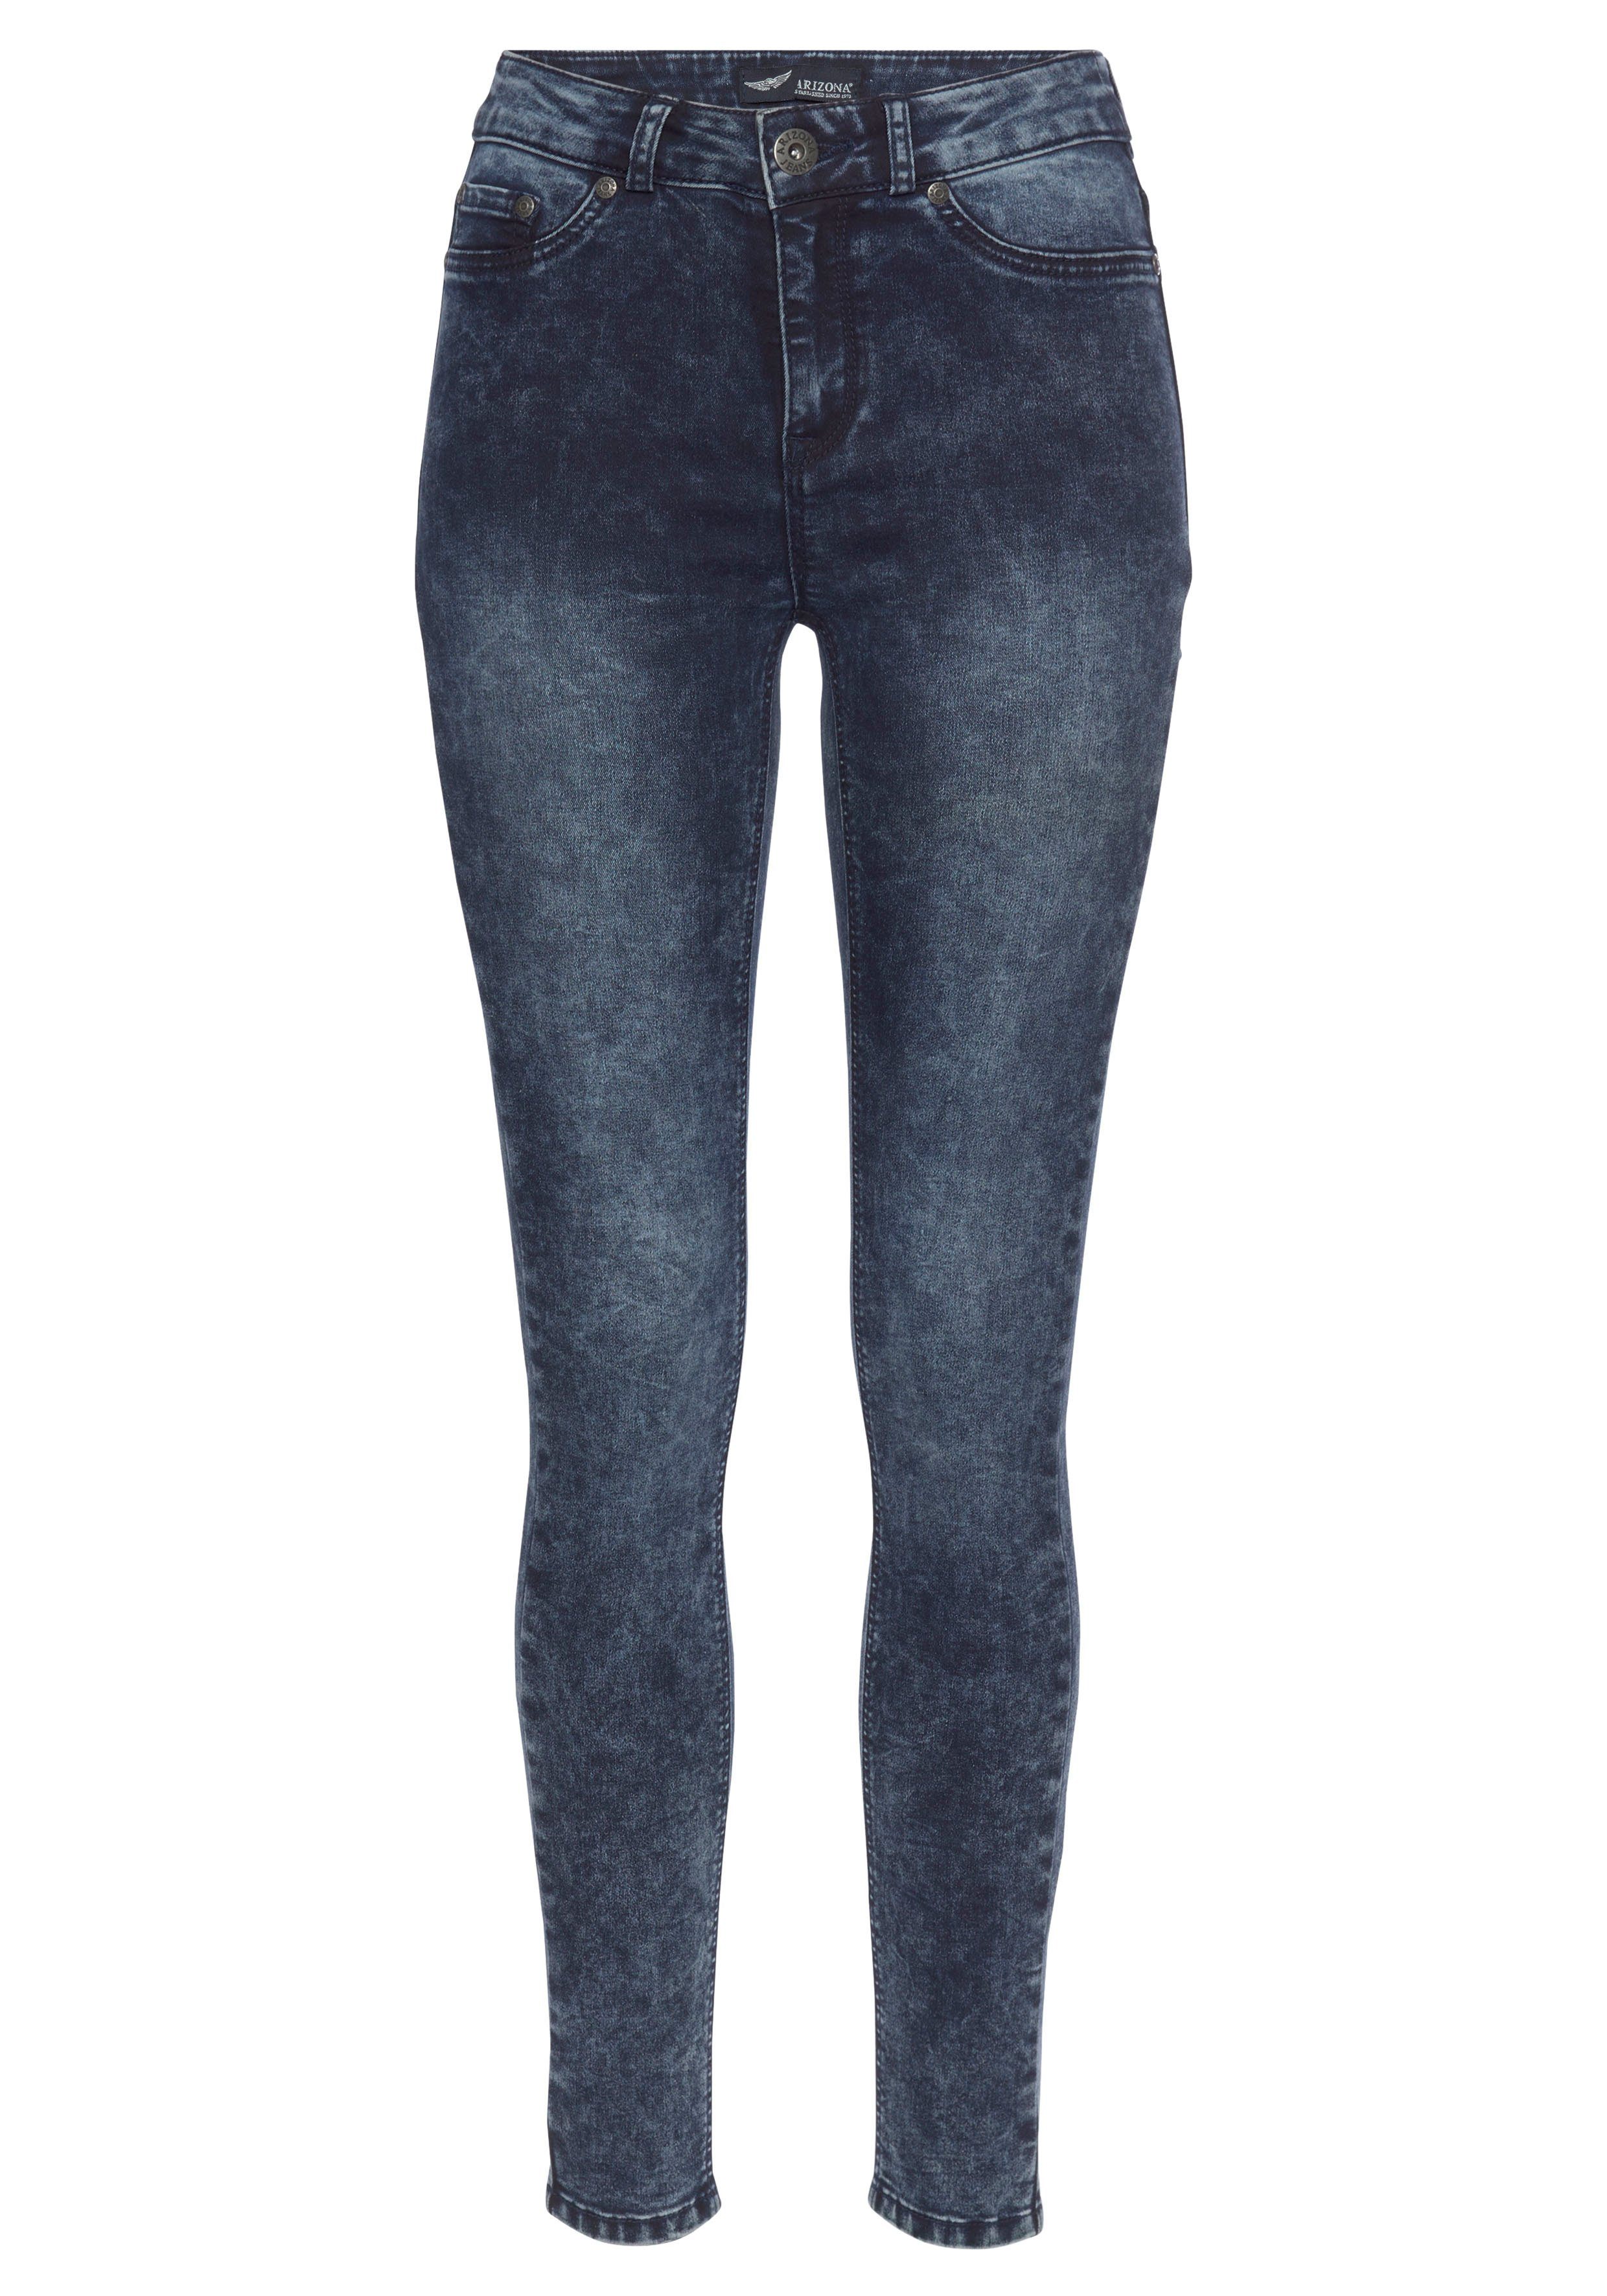 Stretch darkblue-moonwashed Jeans Arizona washed Ultra moon Moonwashed Skinny-fit-Jeans